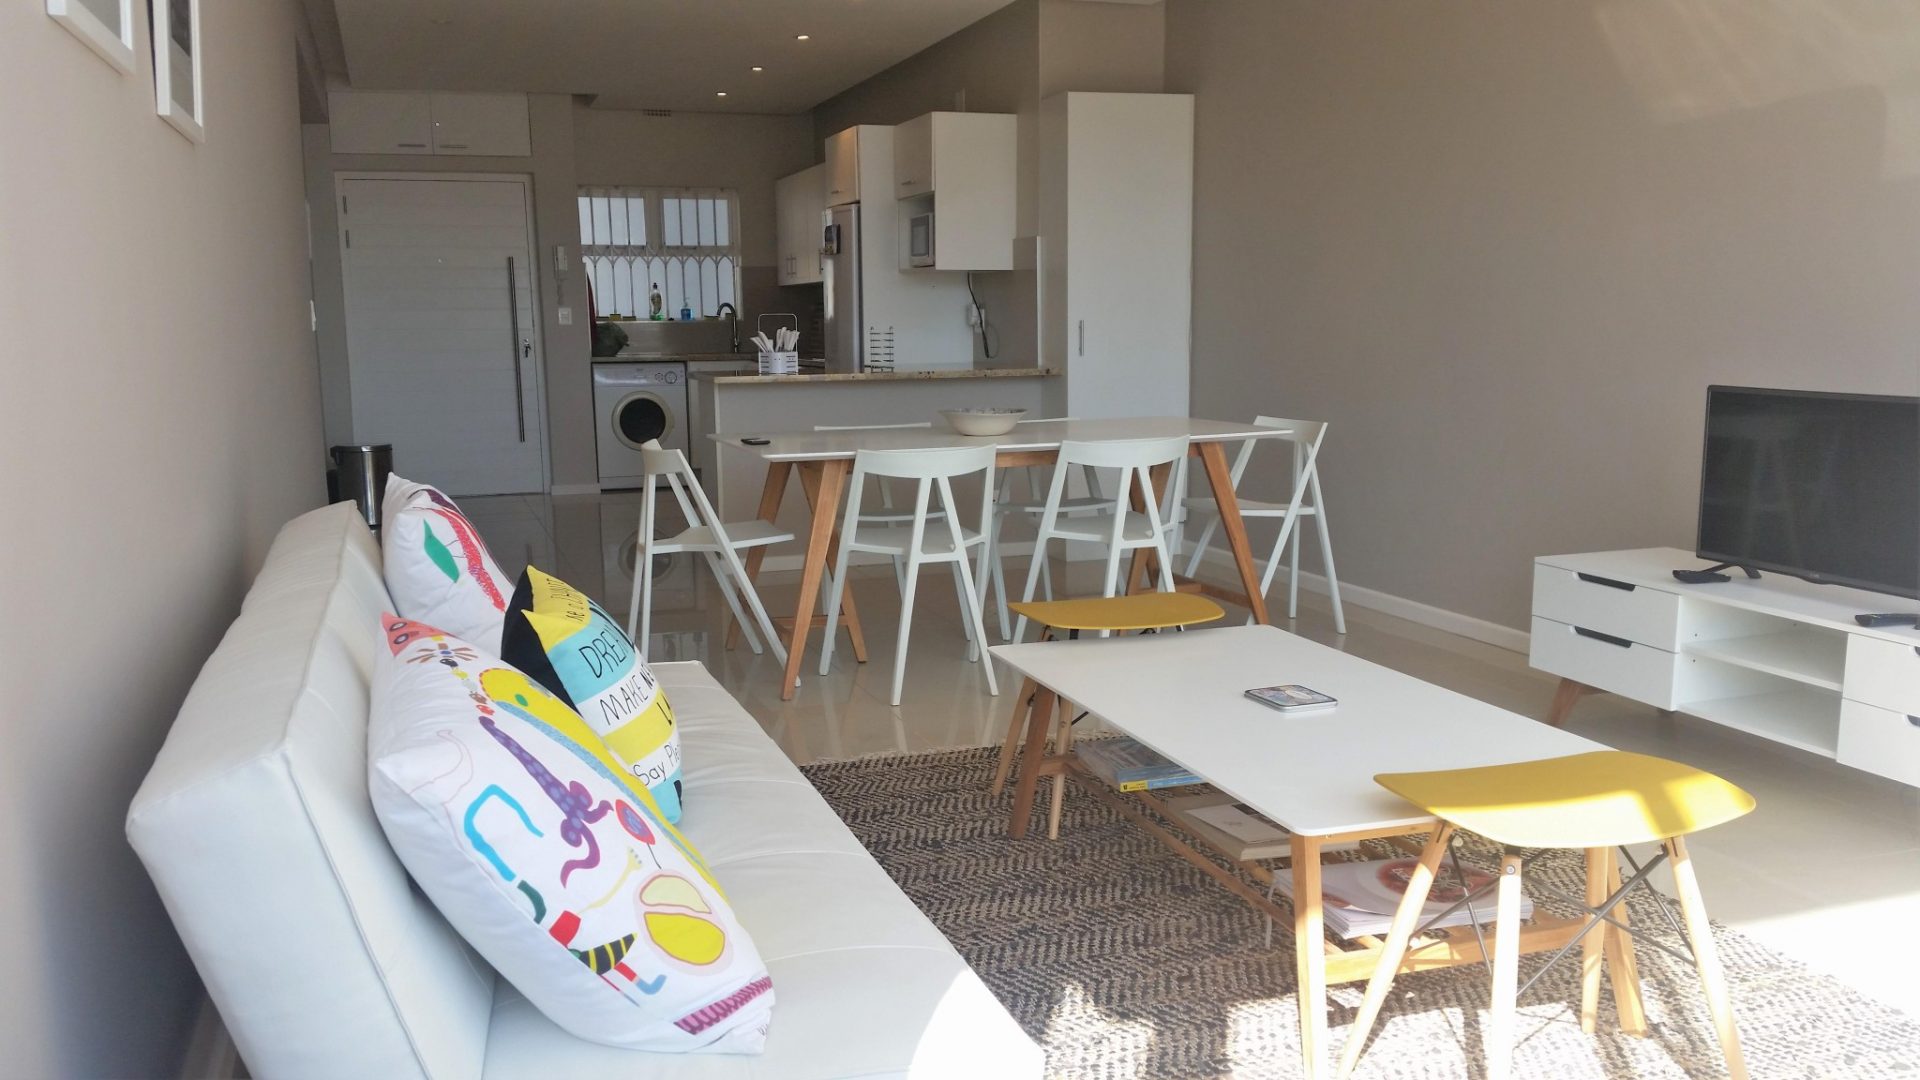 Photo 4 of Seacliffe 405 accommodation in Bantry Bay, Cape Town with 2 bedrooms and 2 bathrooms